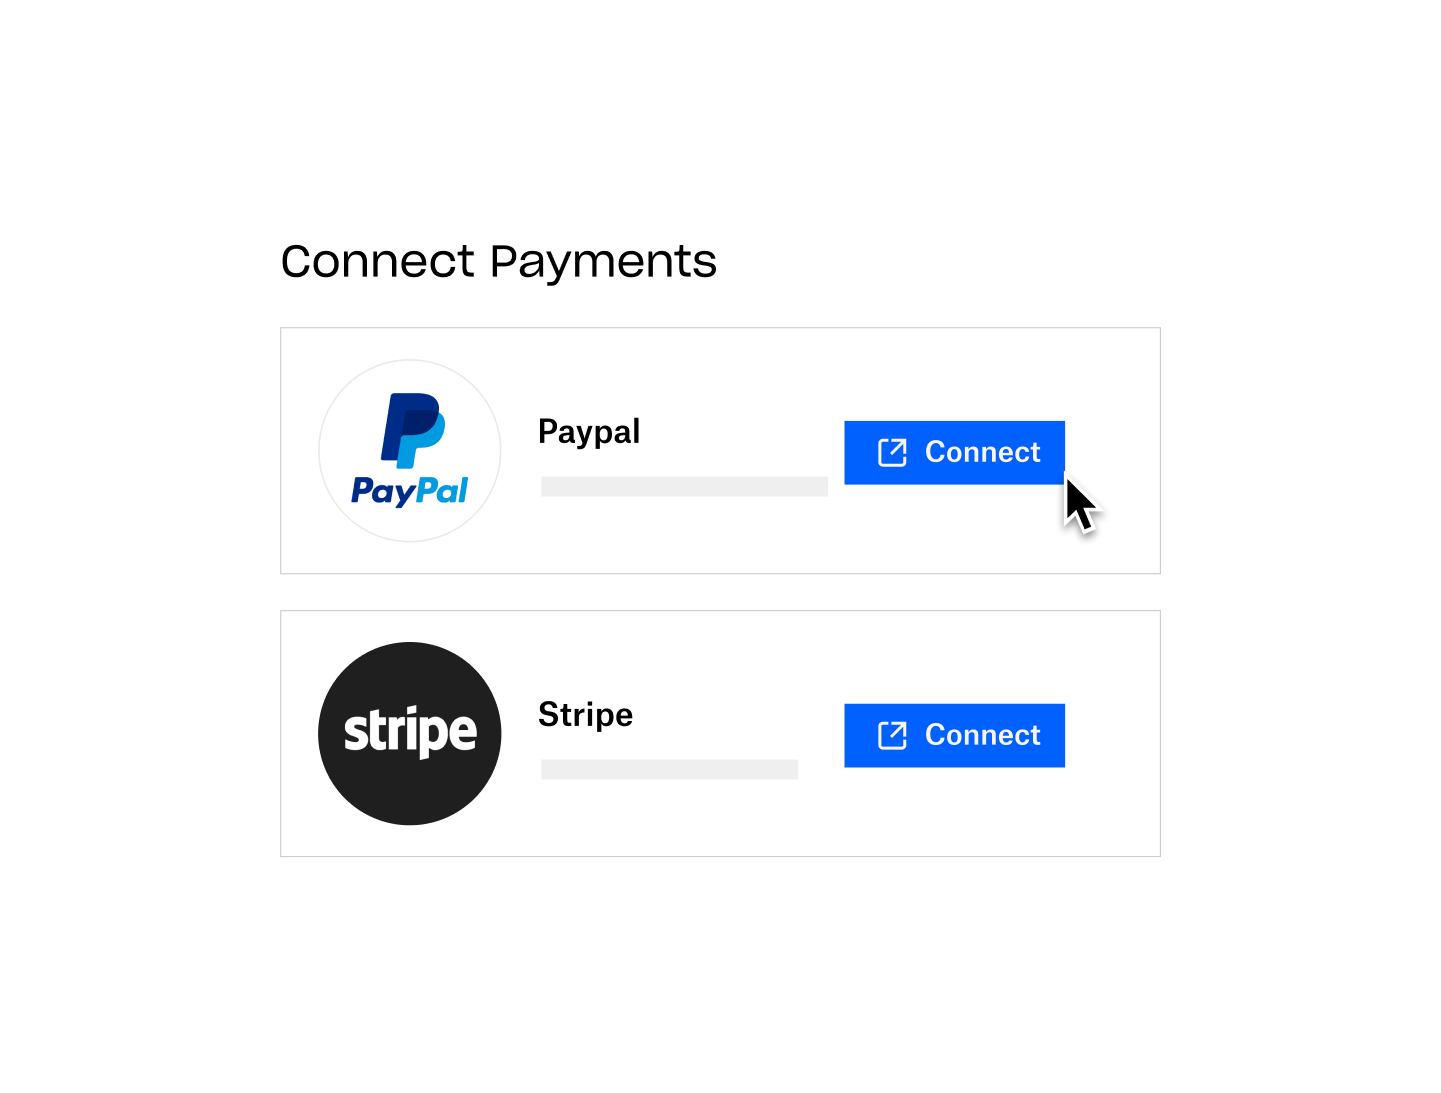 A Dropbox Shop user selects PayPal to process payments. Stripe is also available to process payments.